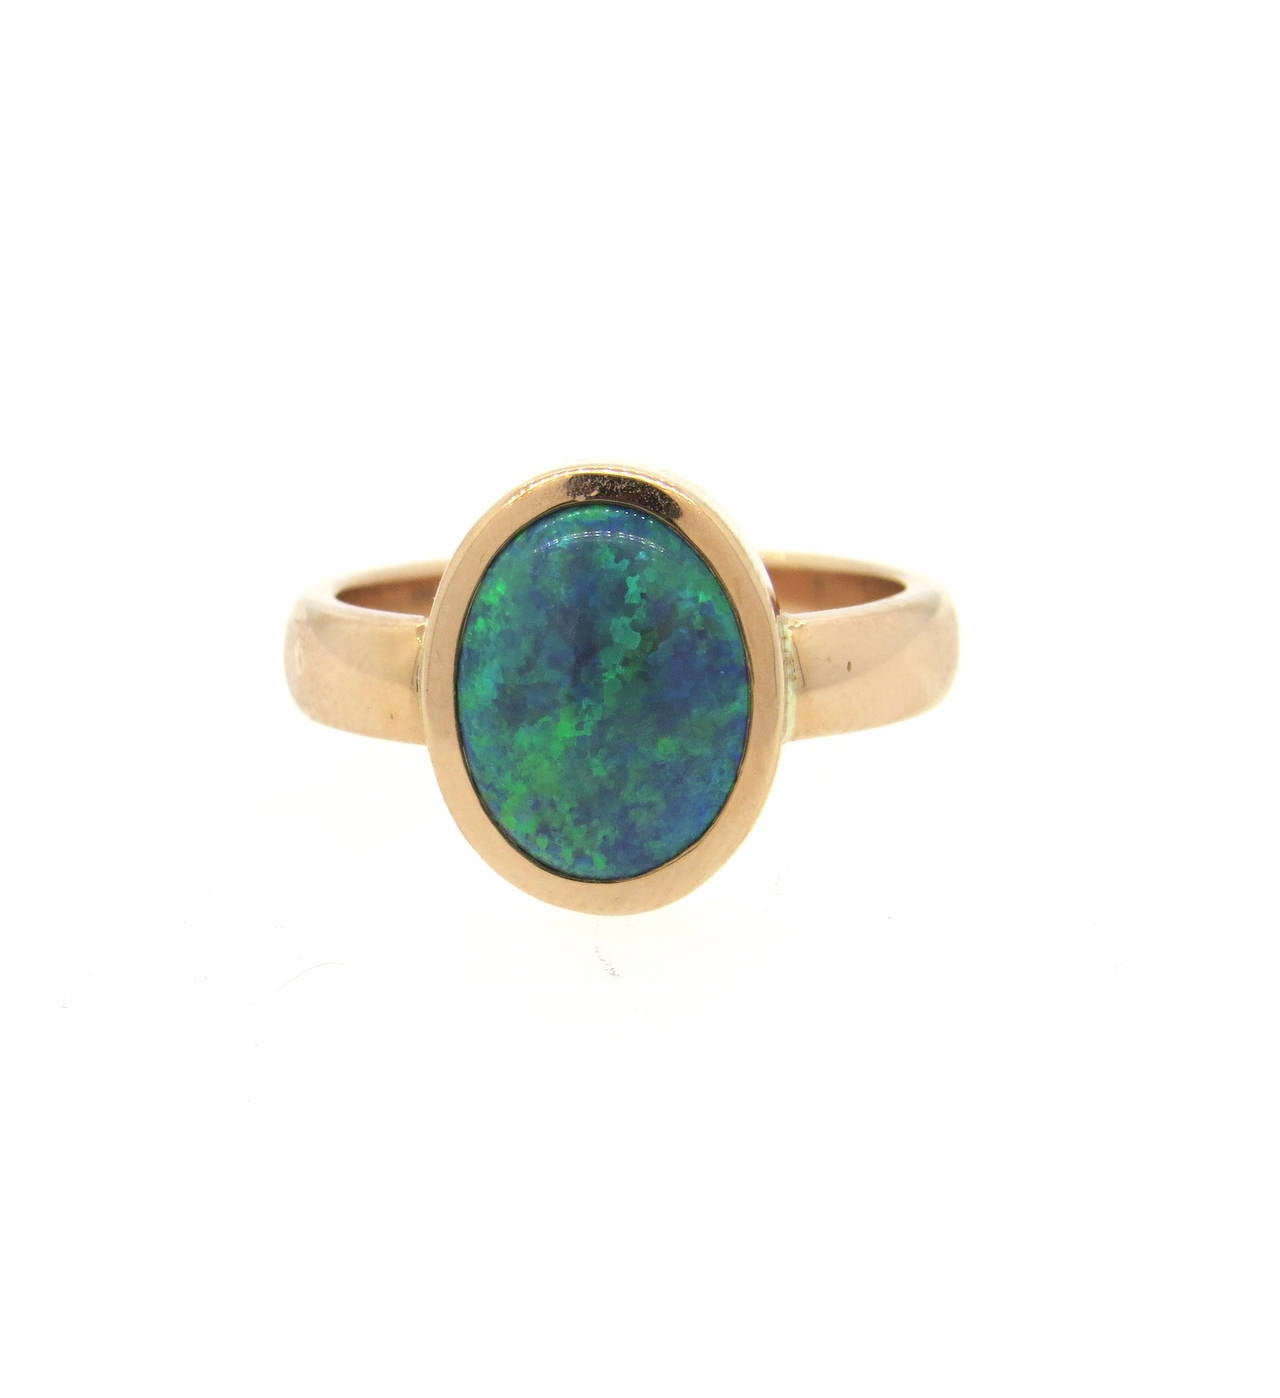 Lorraine Schwartz 18k rose gold ring, featuring 12.2mm x 9.3mm opal gemstone. Ring is a size 9 1/4, ring top measures 15mm x 12mm. Marked with maker's initials and 18k. Weight of the piece - 8.6 grams